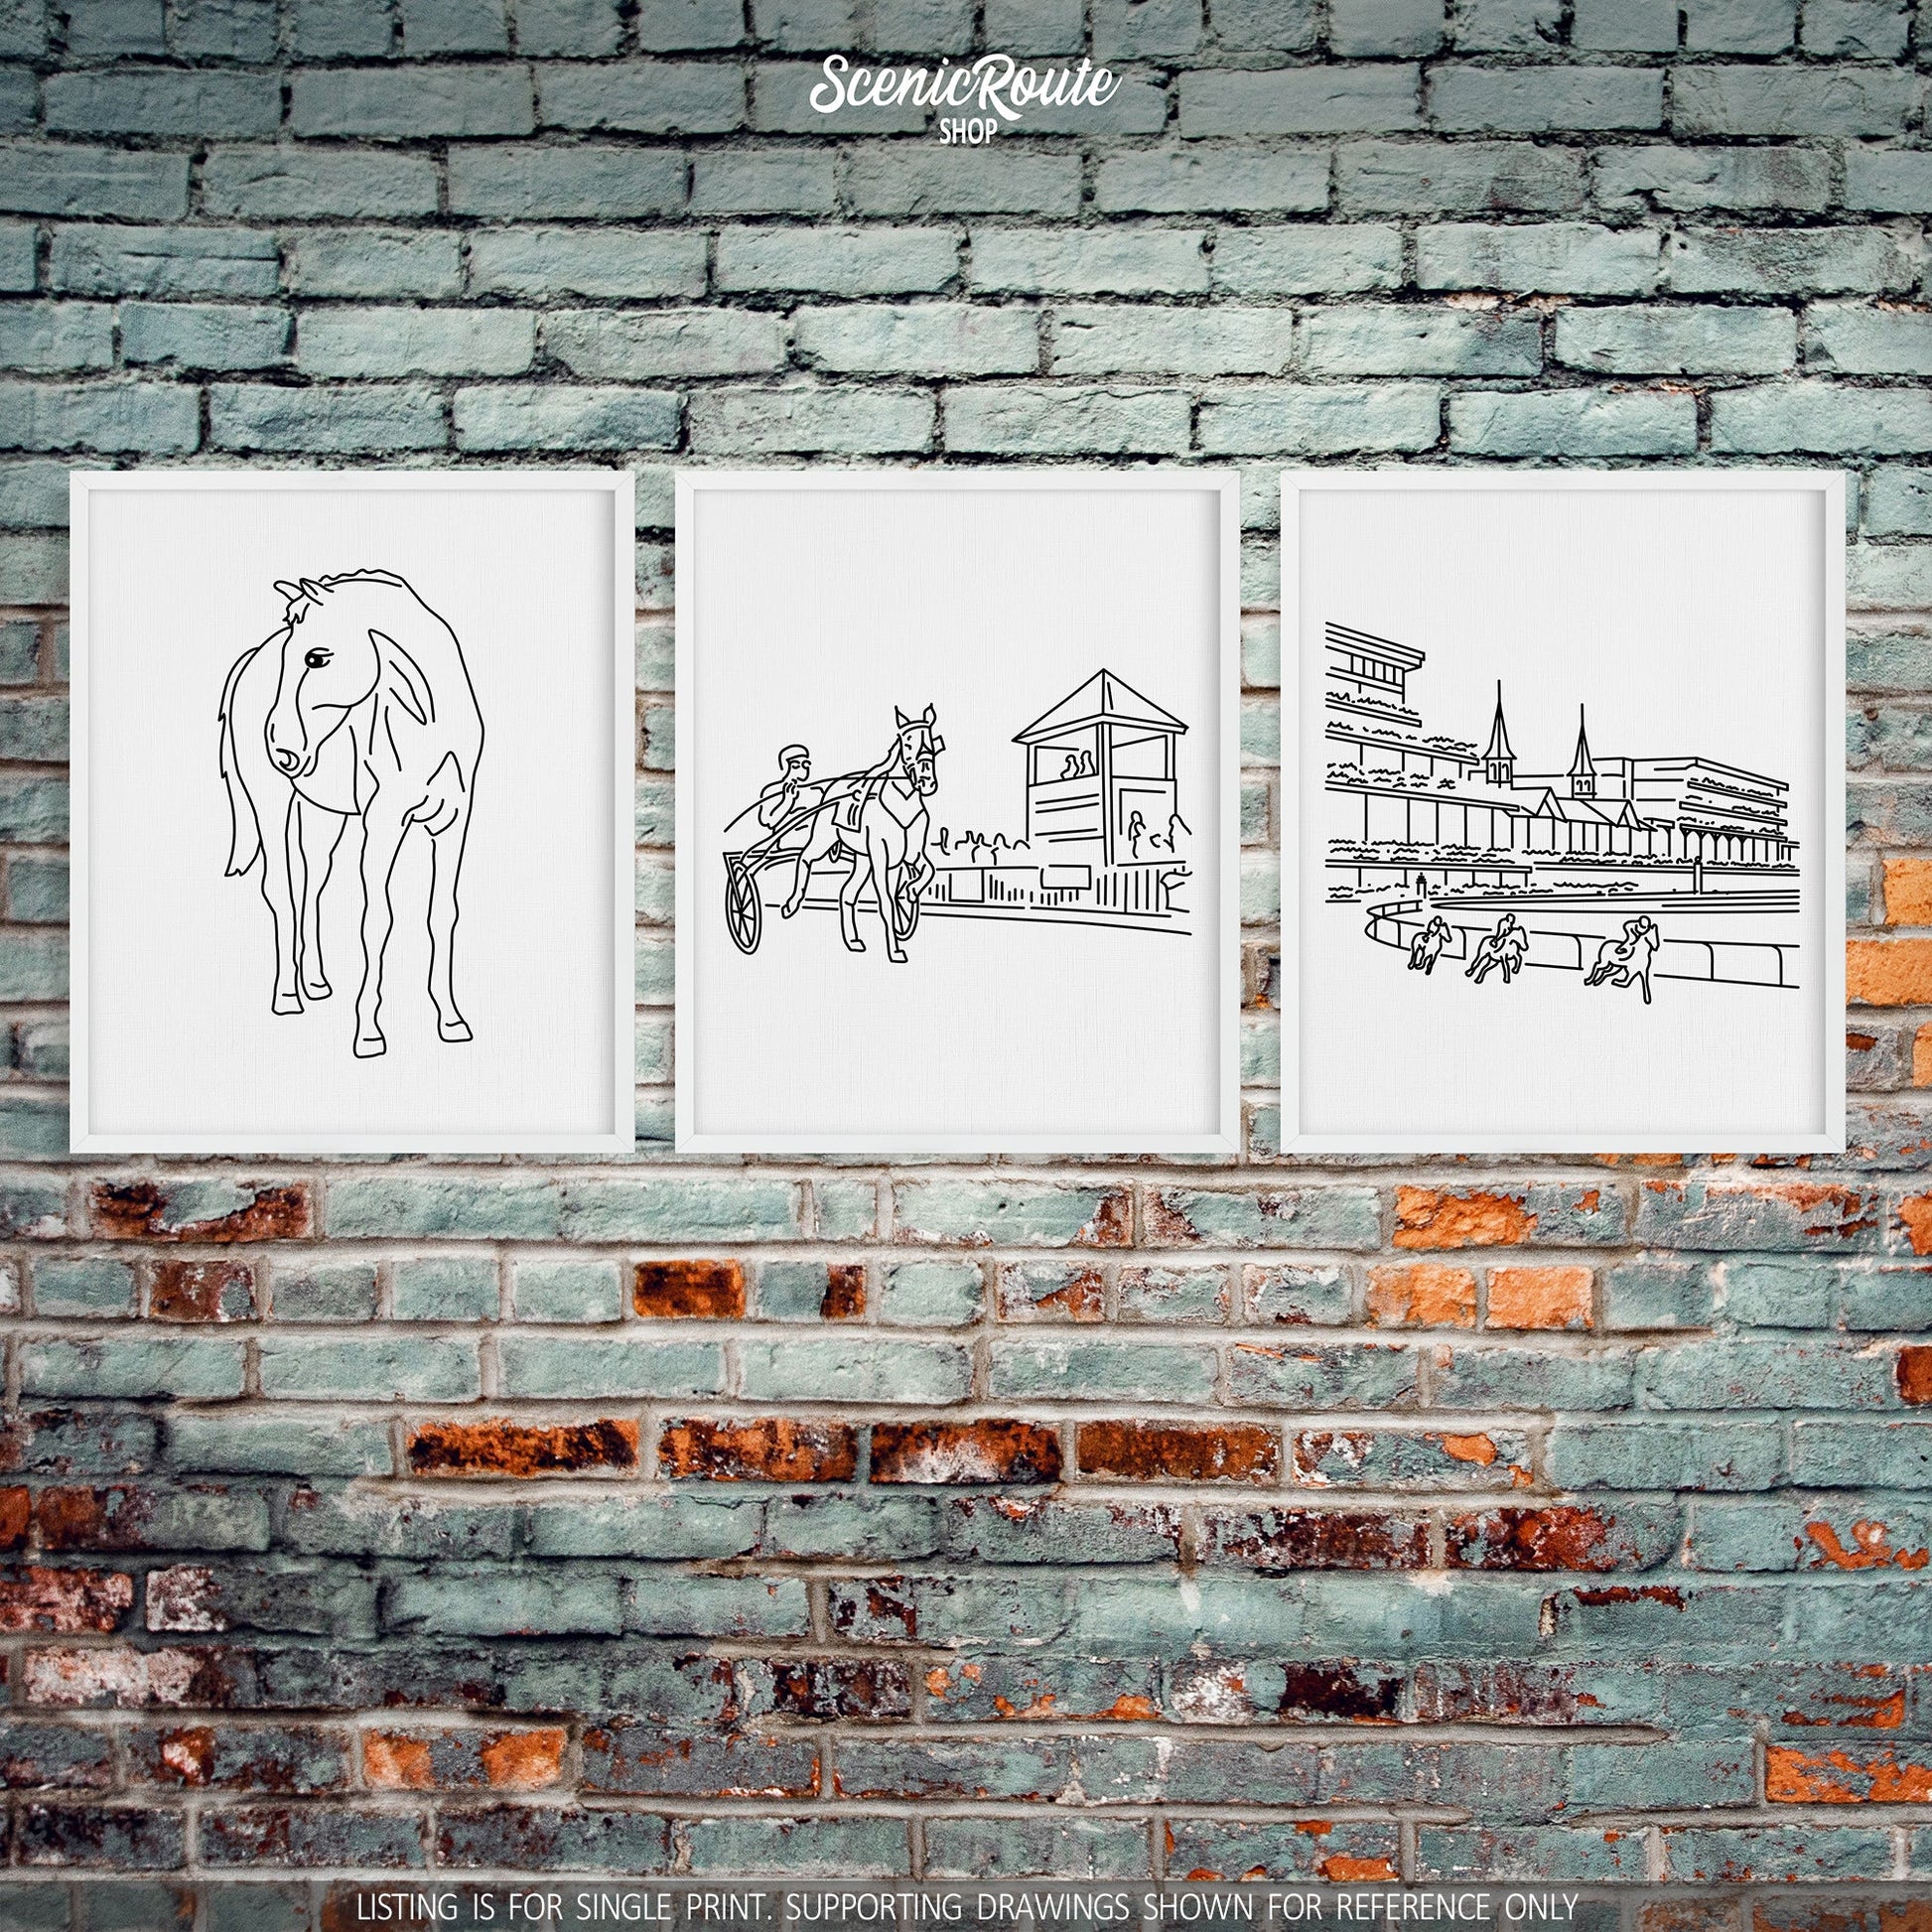 A group of three framed drawings on a brick wall. The line art drawings include a Horse, Harness Racing, and Churchill Downs